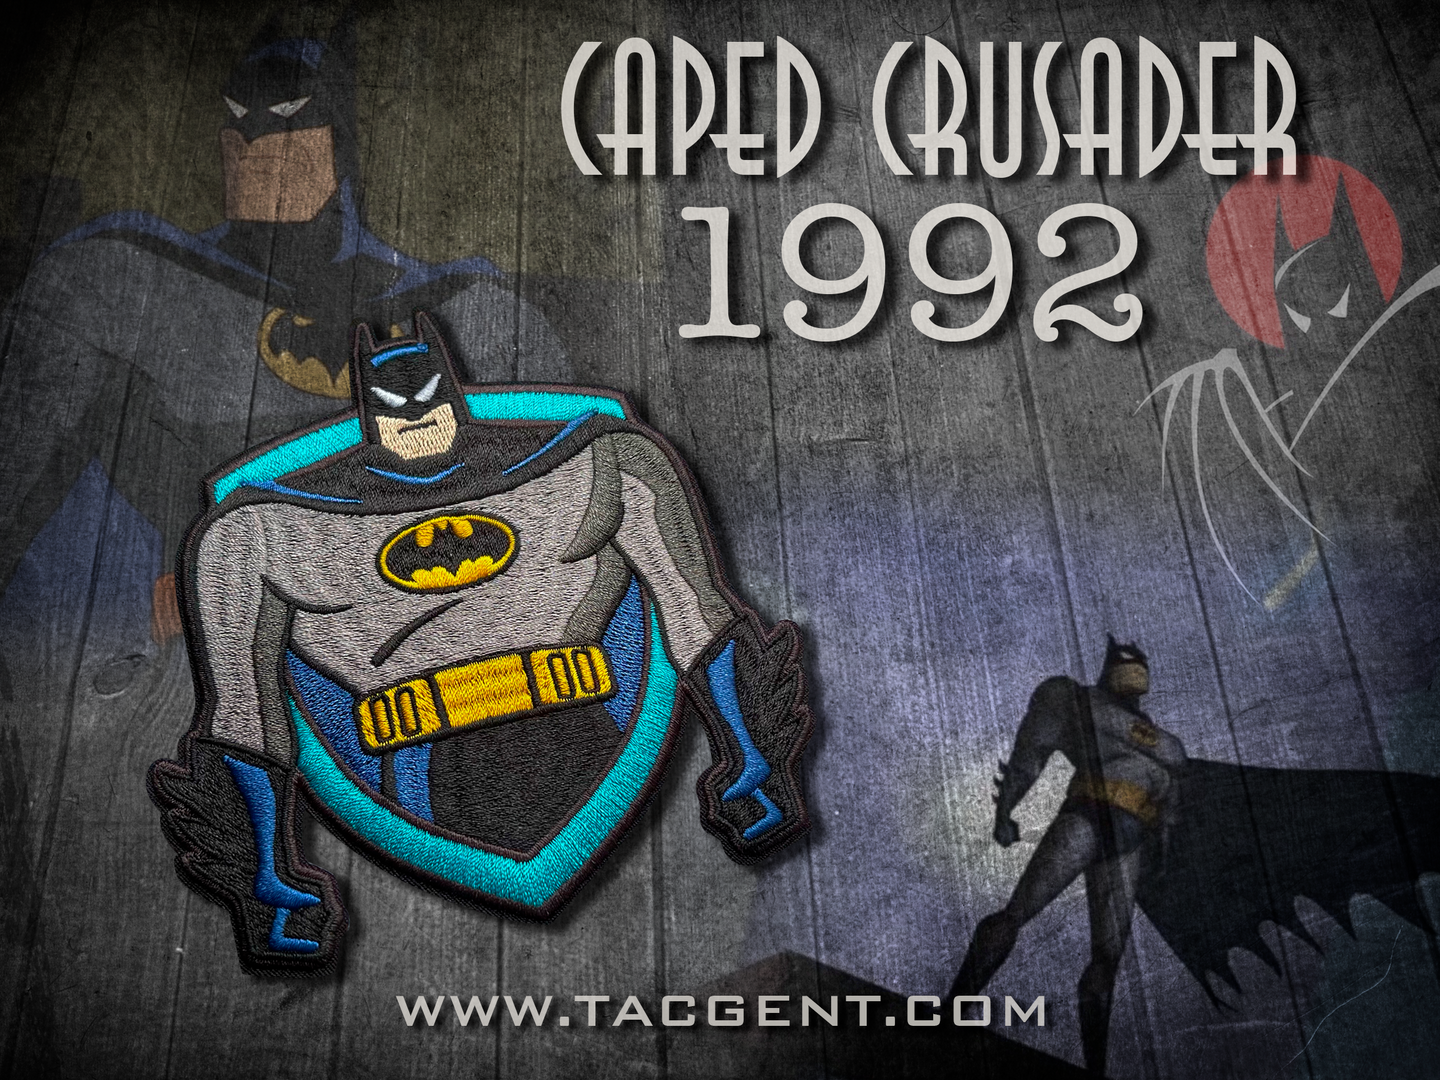 Caped Crusader 1992 Patch